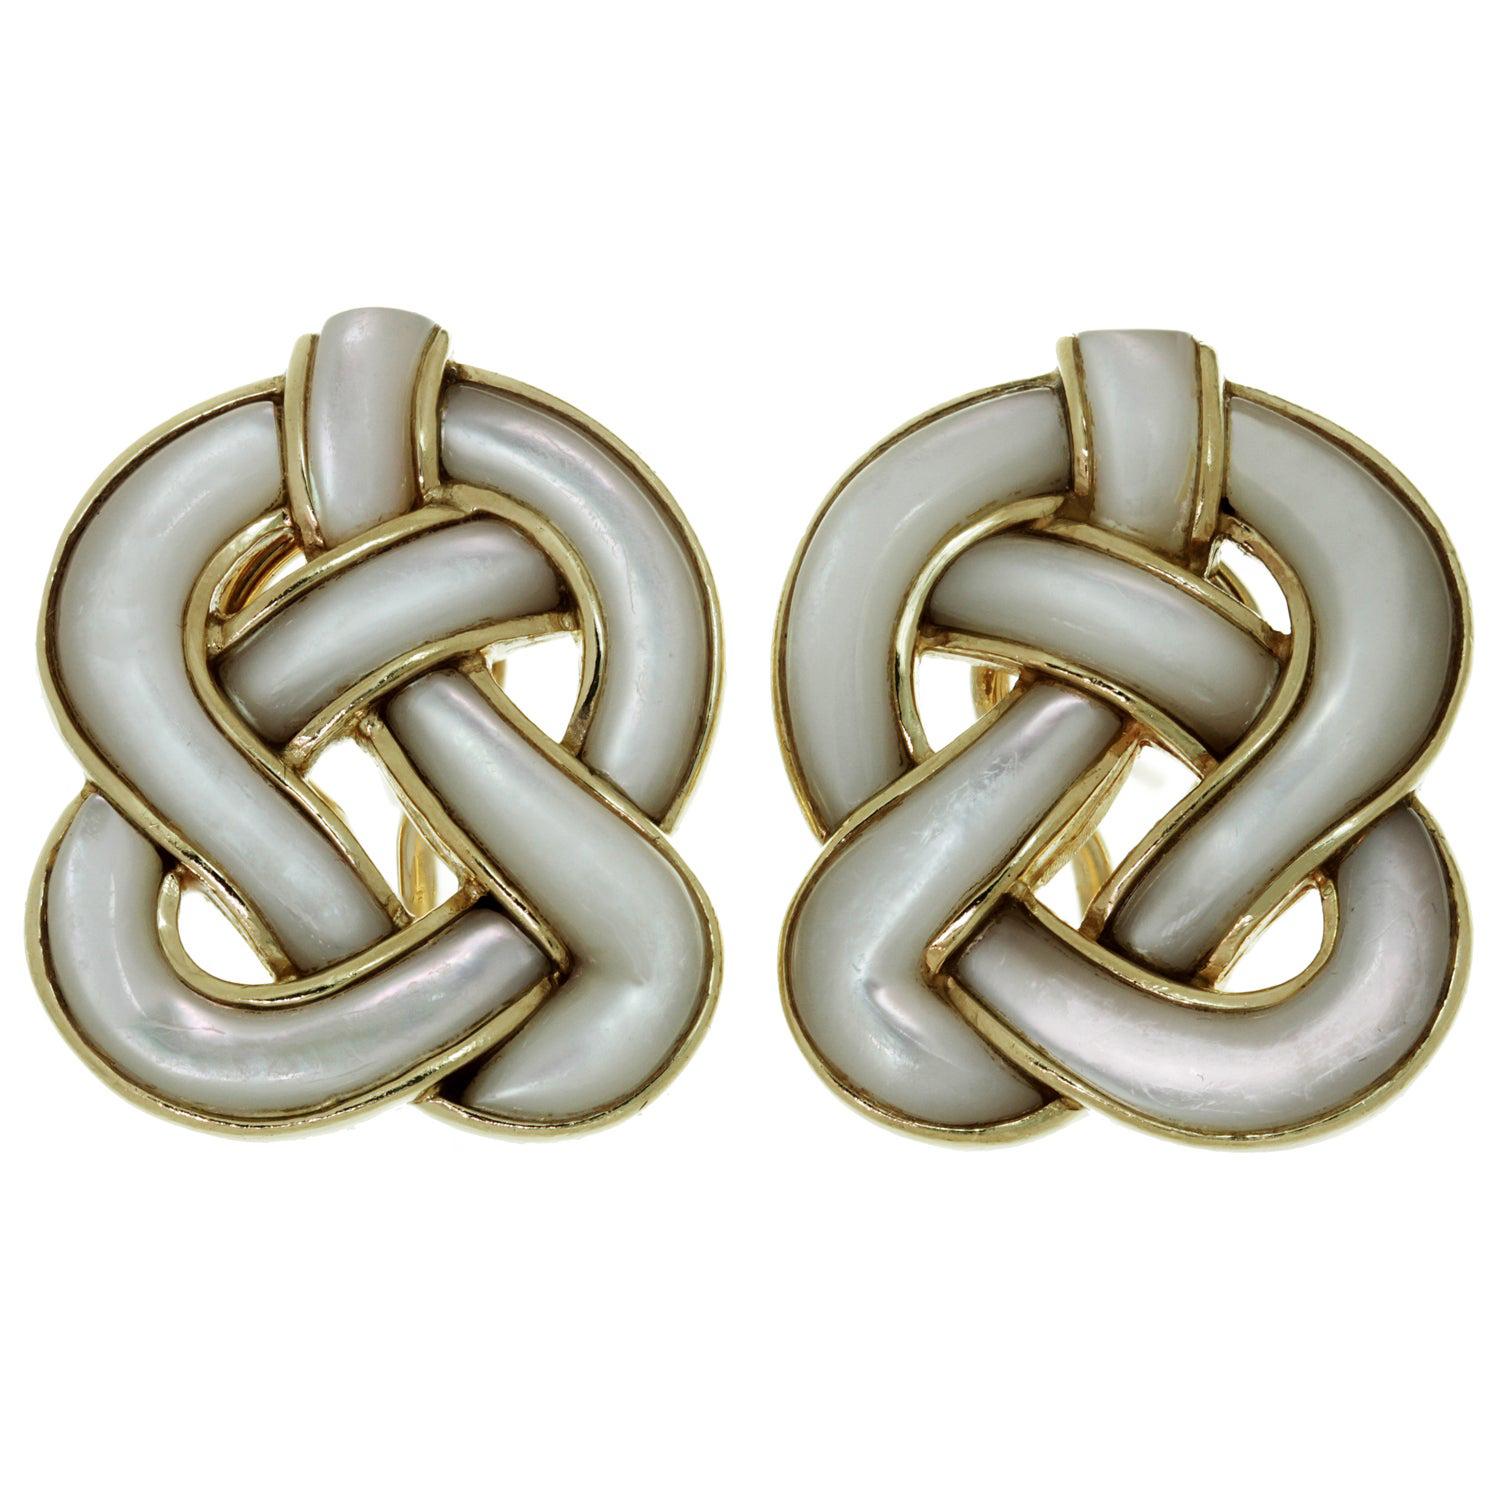 Tiffany & Co. Angela Cummings Mother-of-Pearl Yellow Gold Knot Earrings